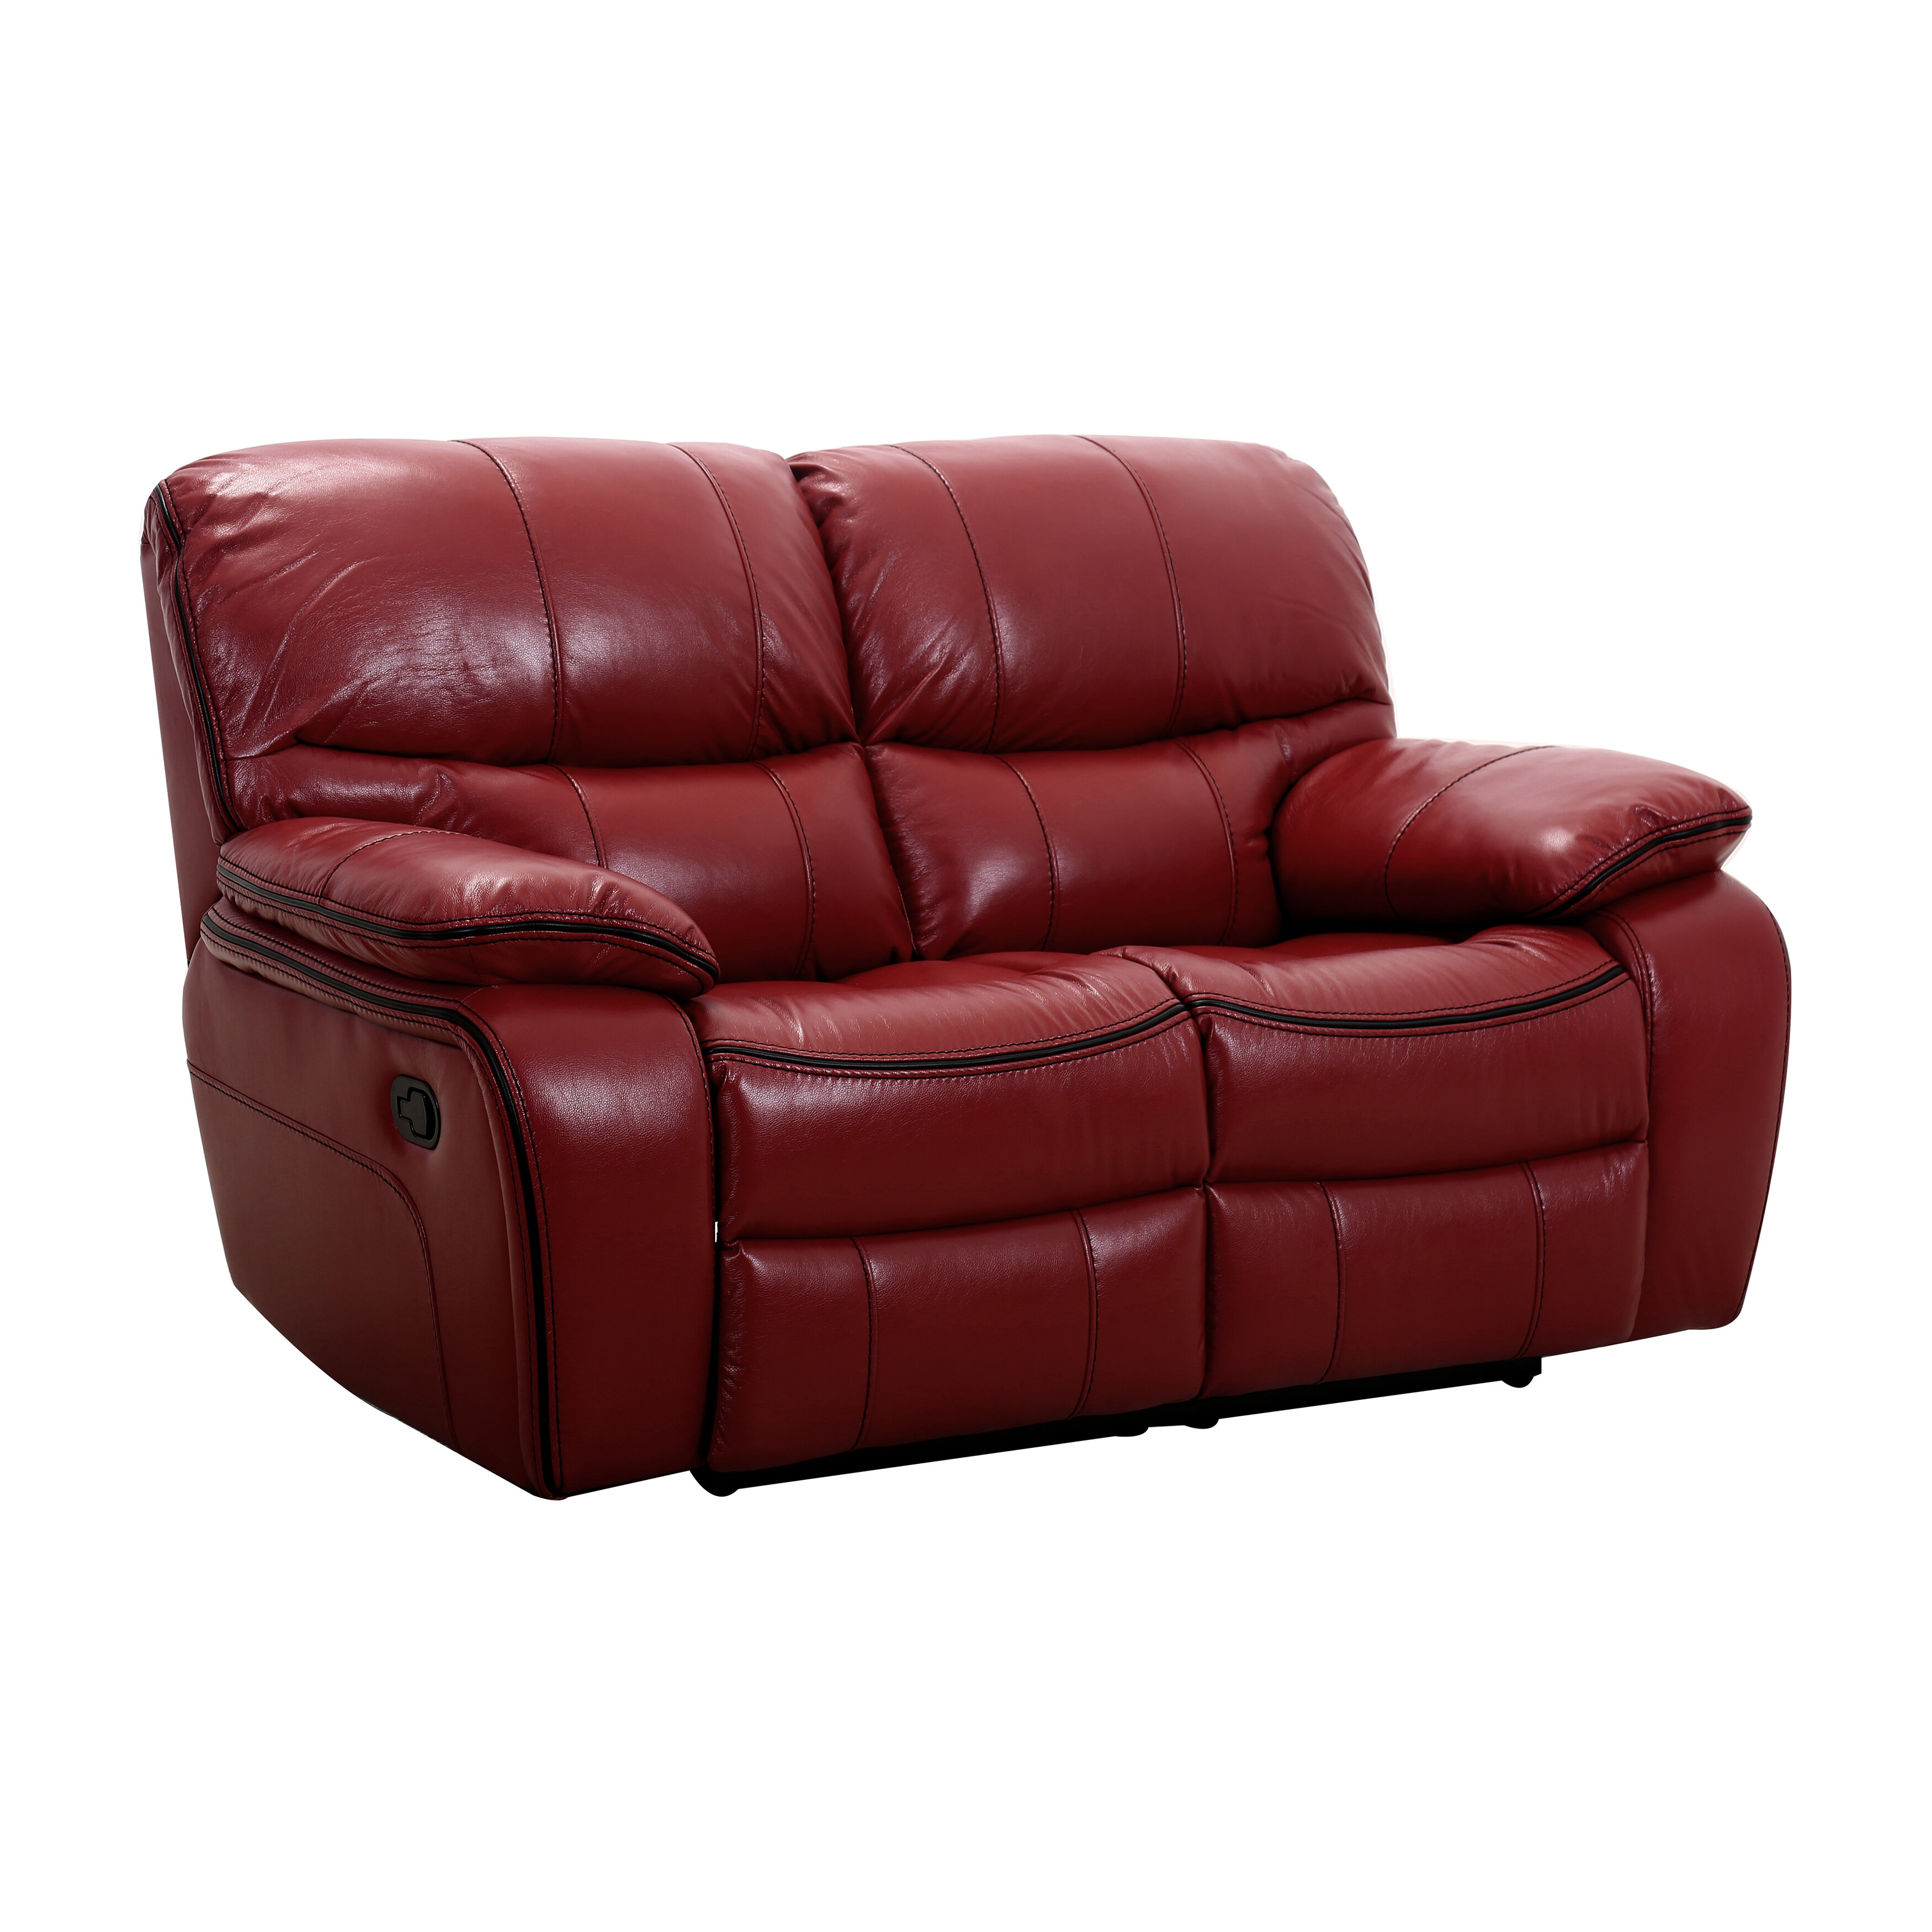 Ector 65” Faux Leather Pillow Top Arm Reclining Loveseat